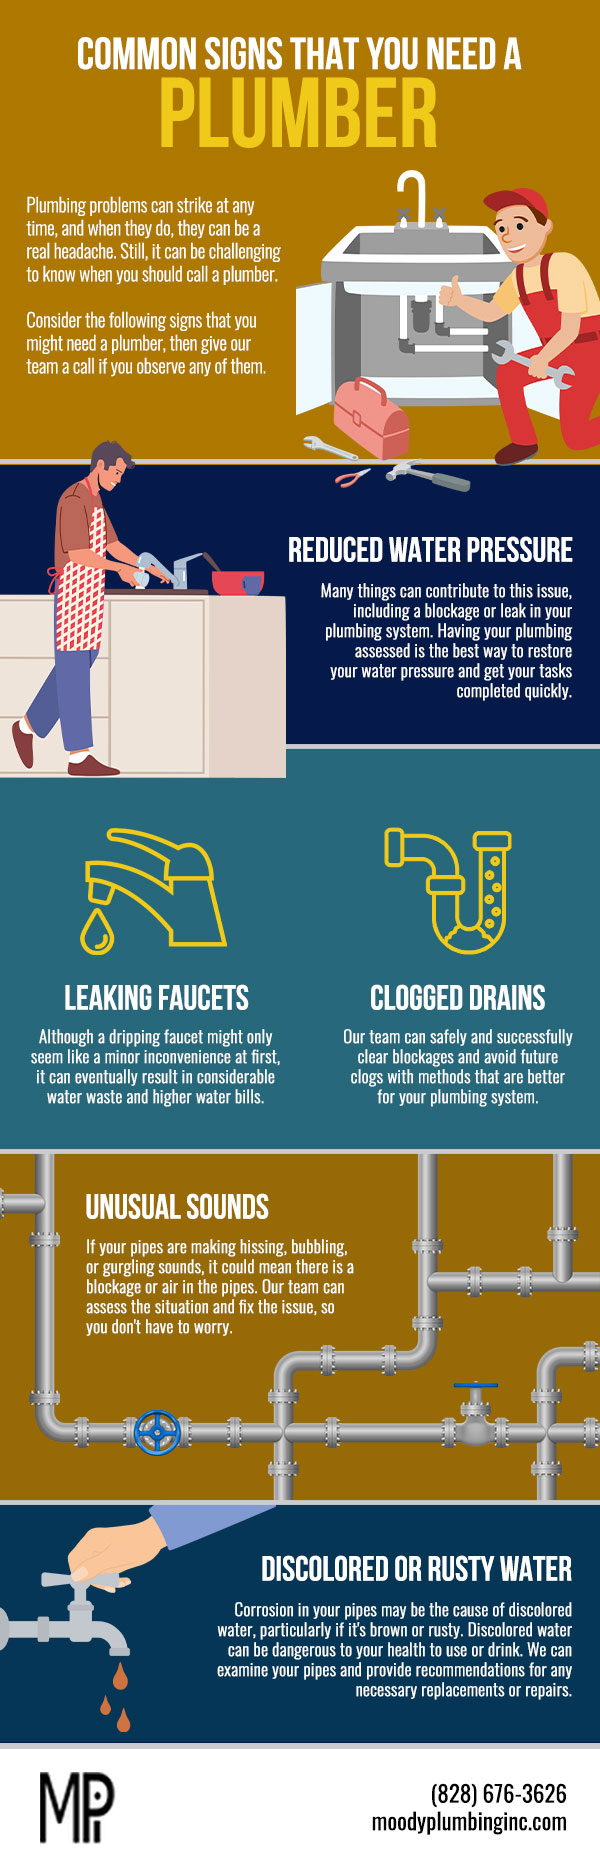 Common Signs That You Need a Plumber